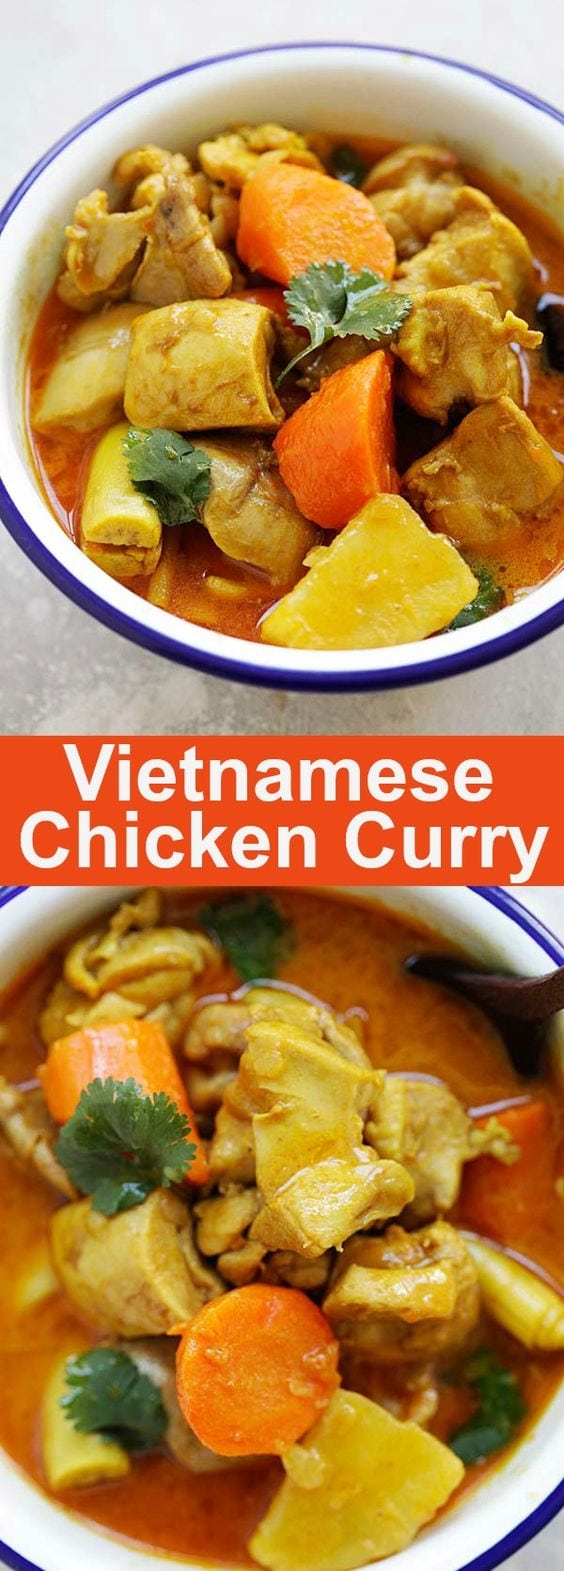 Vietnamese Chicken Curry - best Ca Ri Ga recipe ever, with tender chicken, rich curry with potatoes and carrots. This chicken curry is so good | rasamalaysia.com